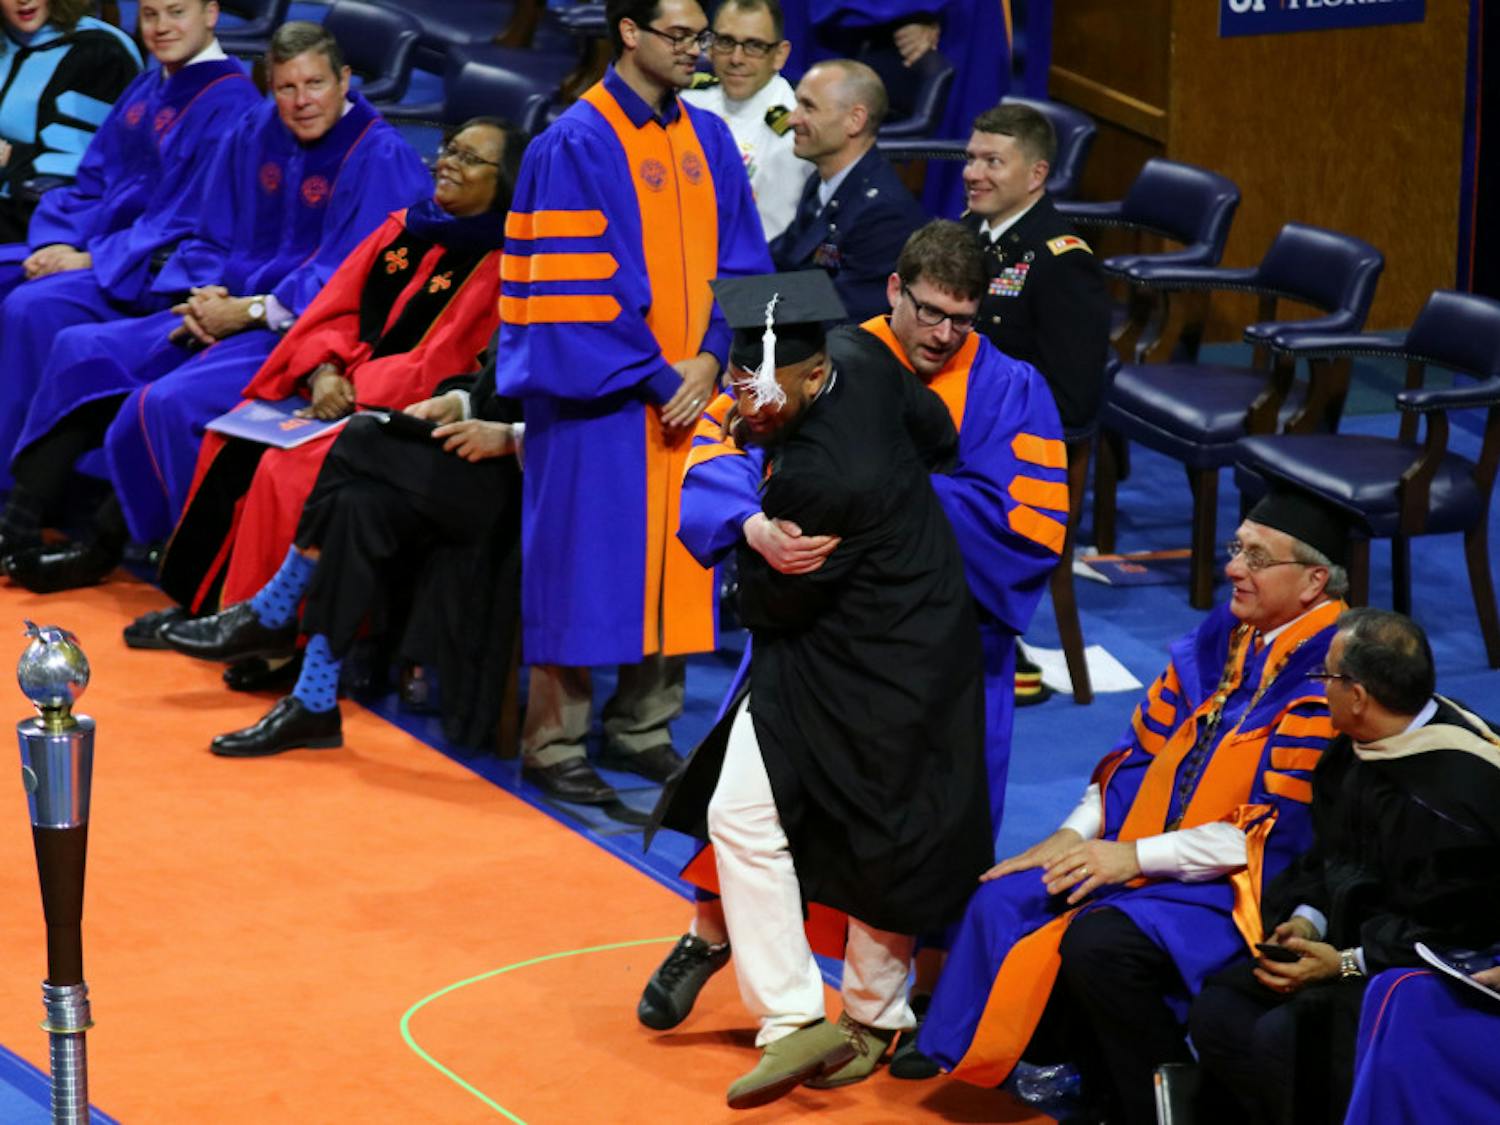 UF sent framed diplomas to the 24 students who were rushed off stage during the Spring commencement ceremony.